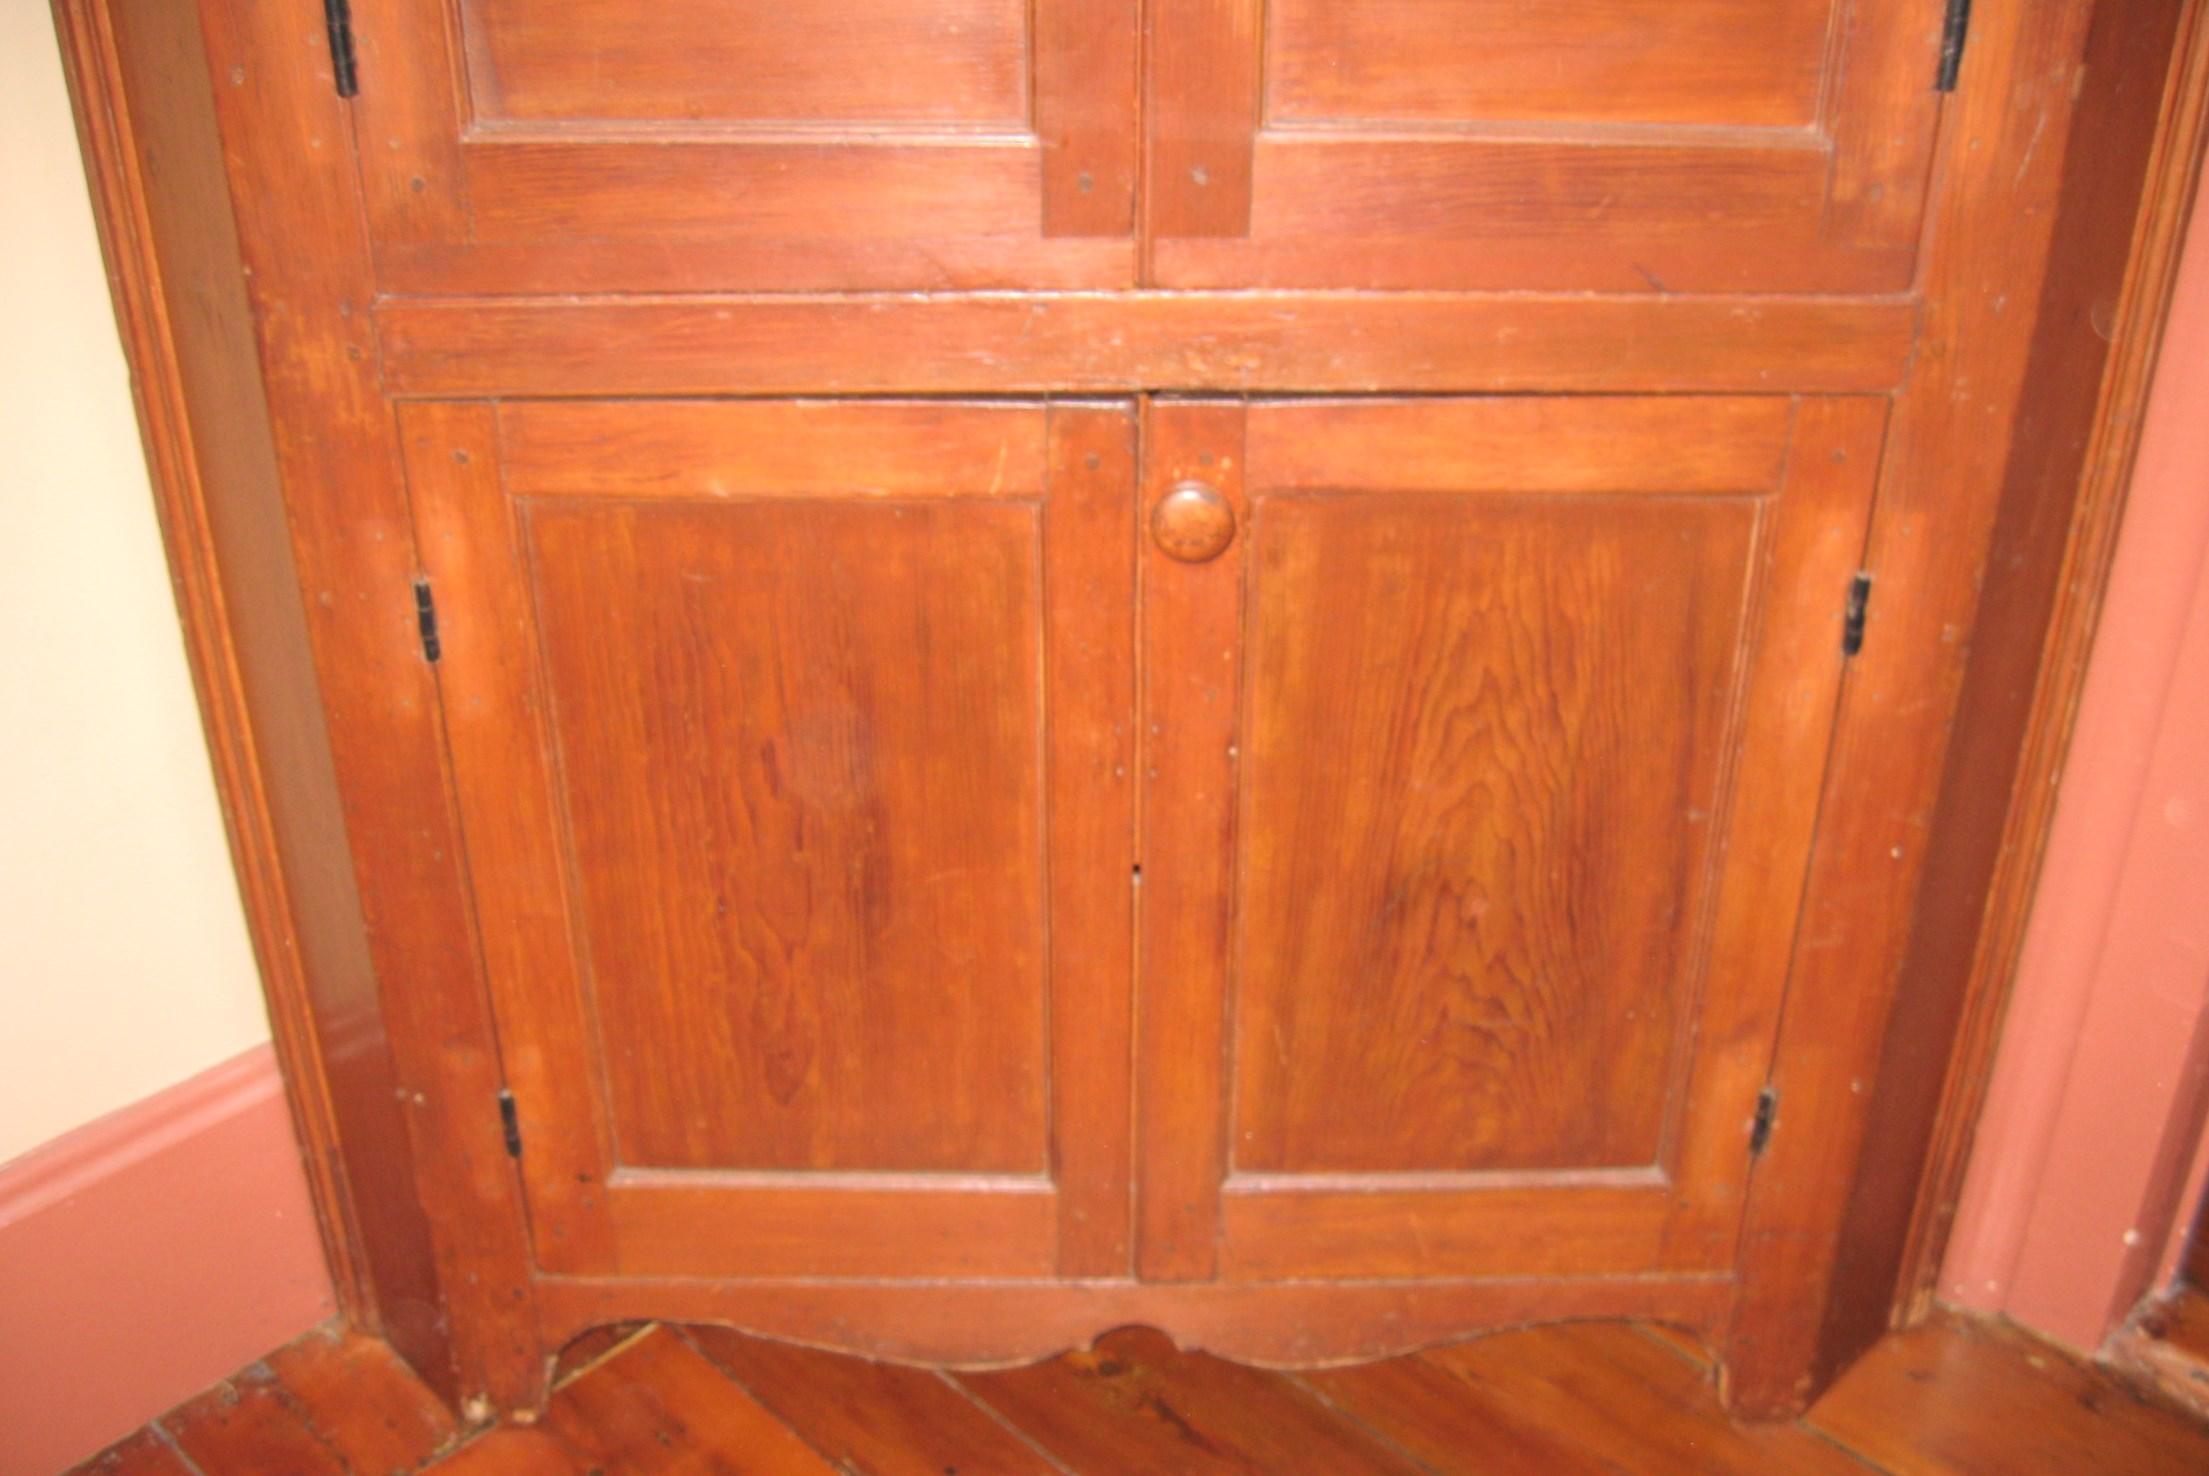 1850s Cherry Corner Cupboard Farm House Rustic Cabinet In Good Condition For Sale In Wallkill, NY